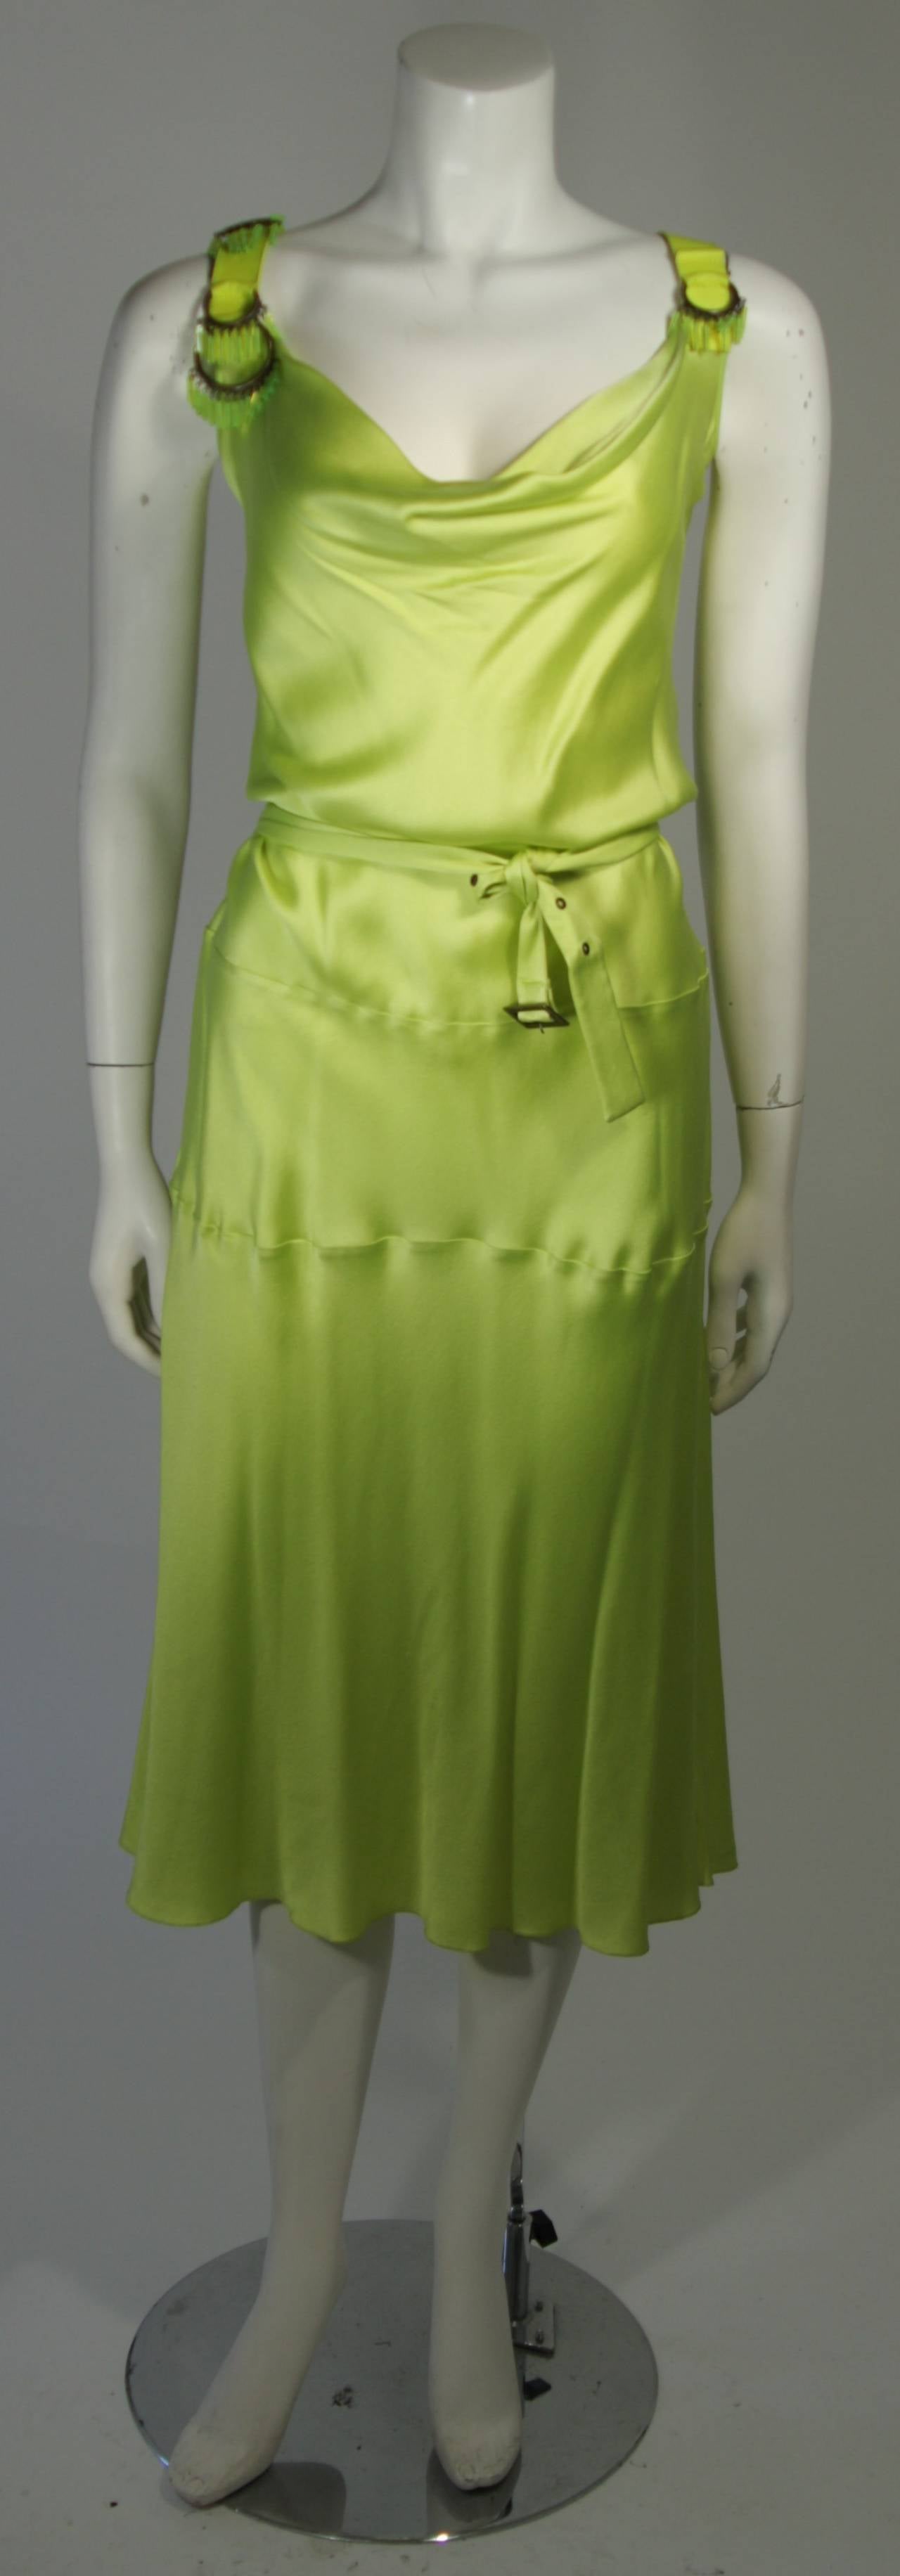 This is a sexy evening cocktail dress made by John Galiano. It is made from a lime green silk charmeuse, bias cut, drapes at the bust and the back. There is a matching belt that fits low on the waist. There are leather straps and metal rings with